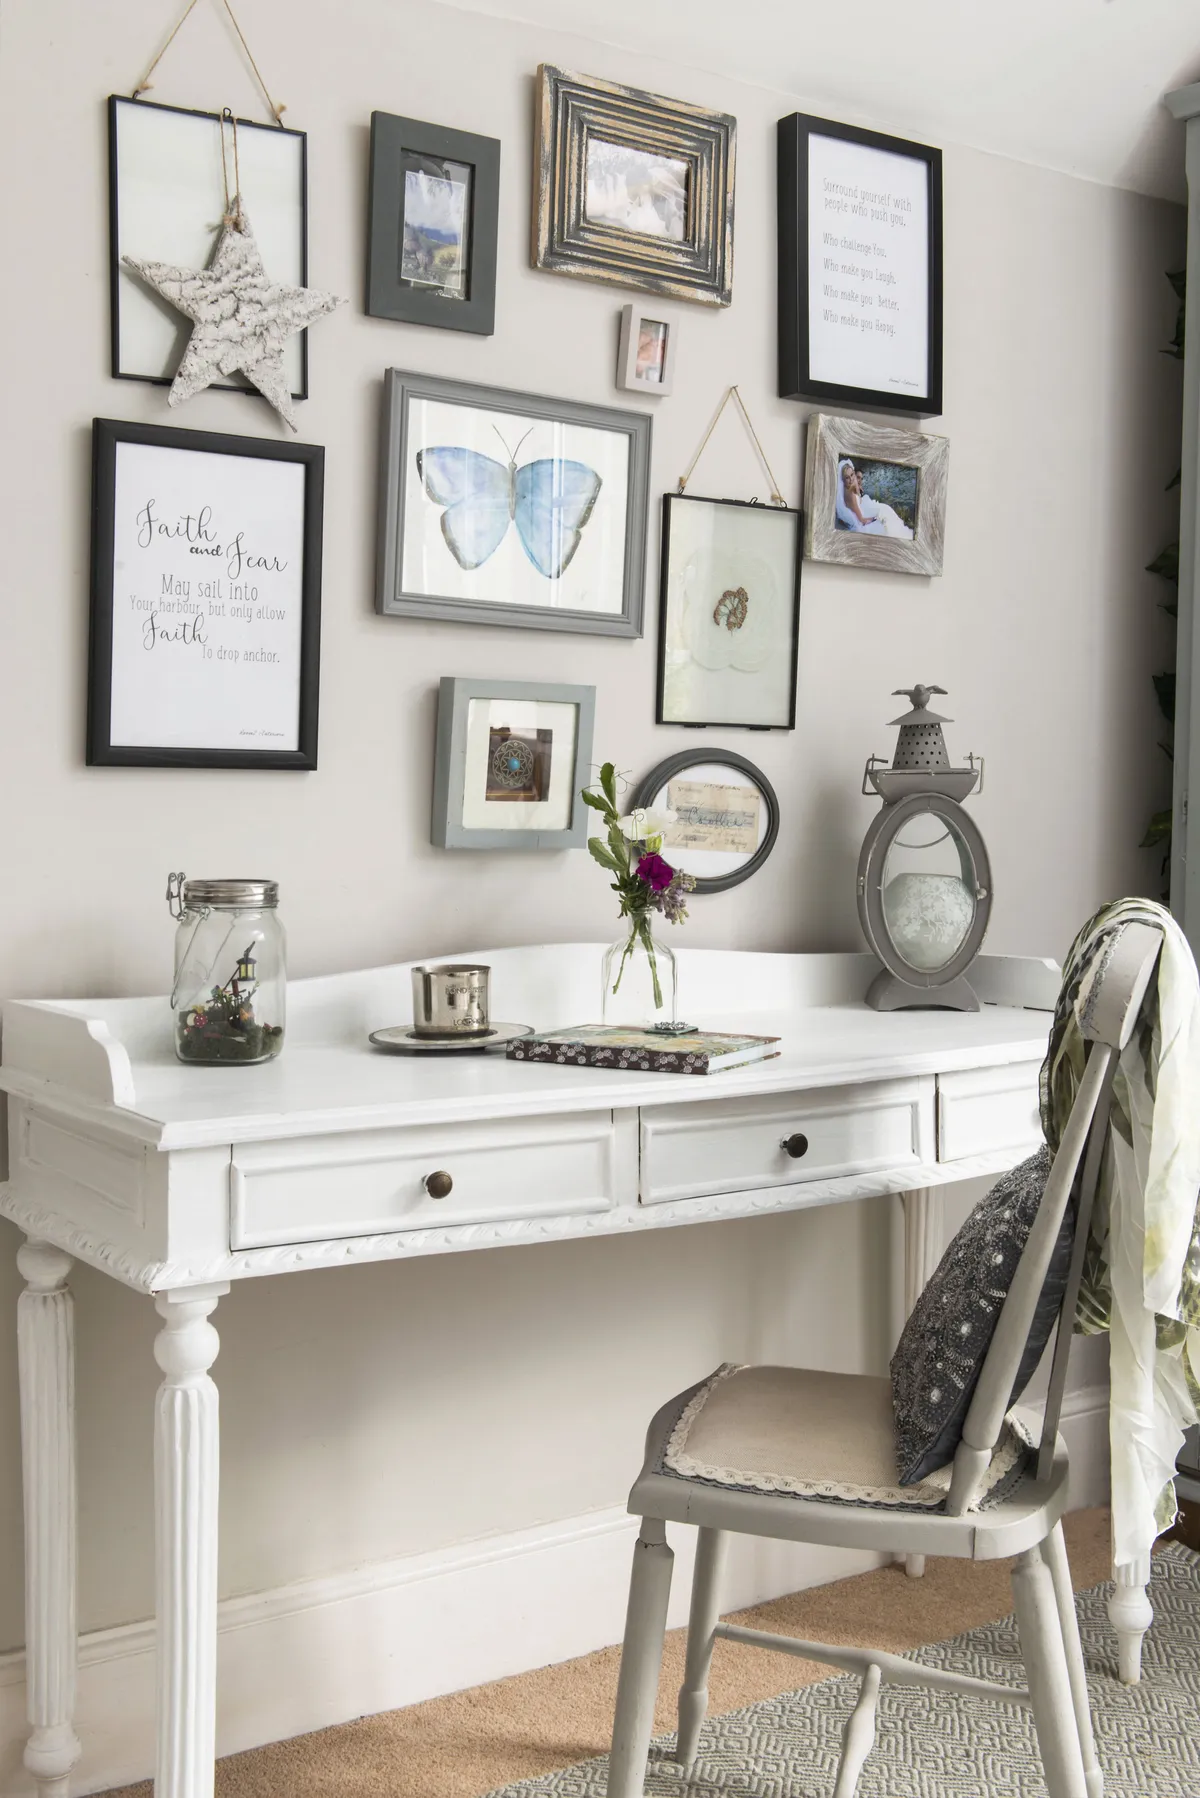 Add a desk to a spare bedroom so it’s a useful space even when guests aren’t staying. Danecia’s is a second-hand find, painted and updated with new knobs from B&Q